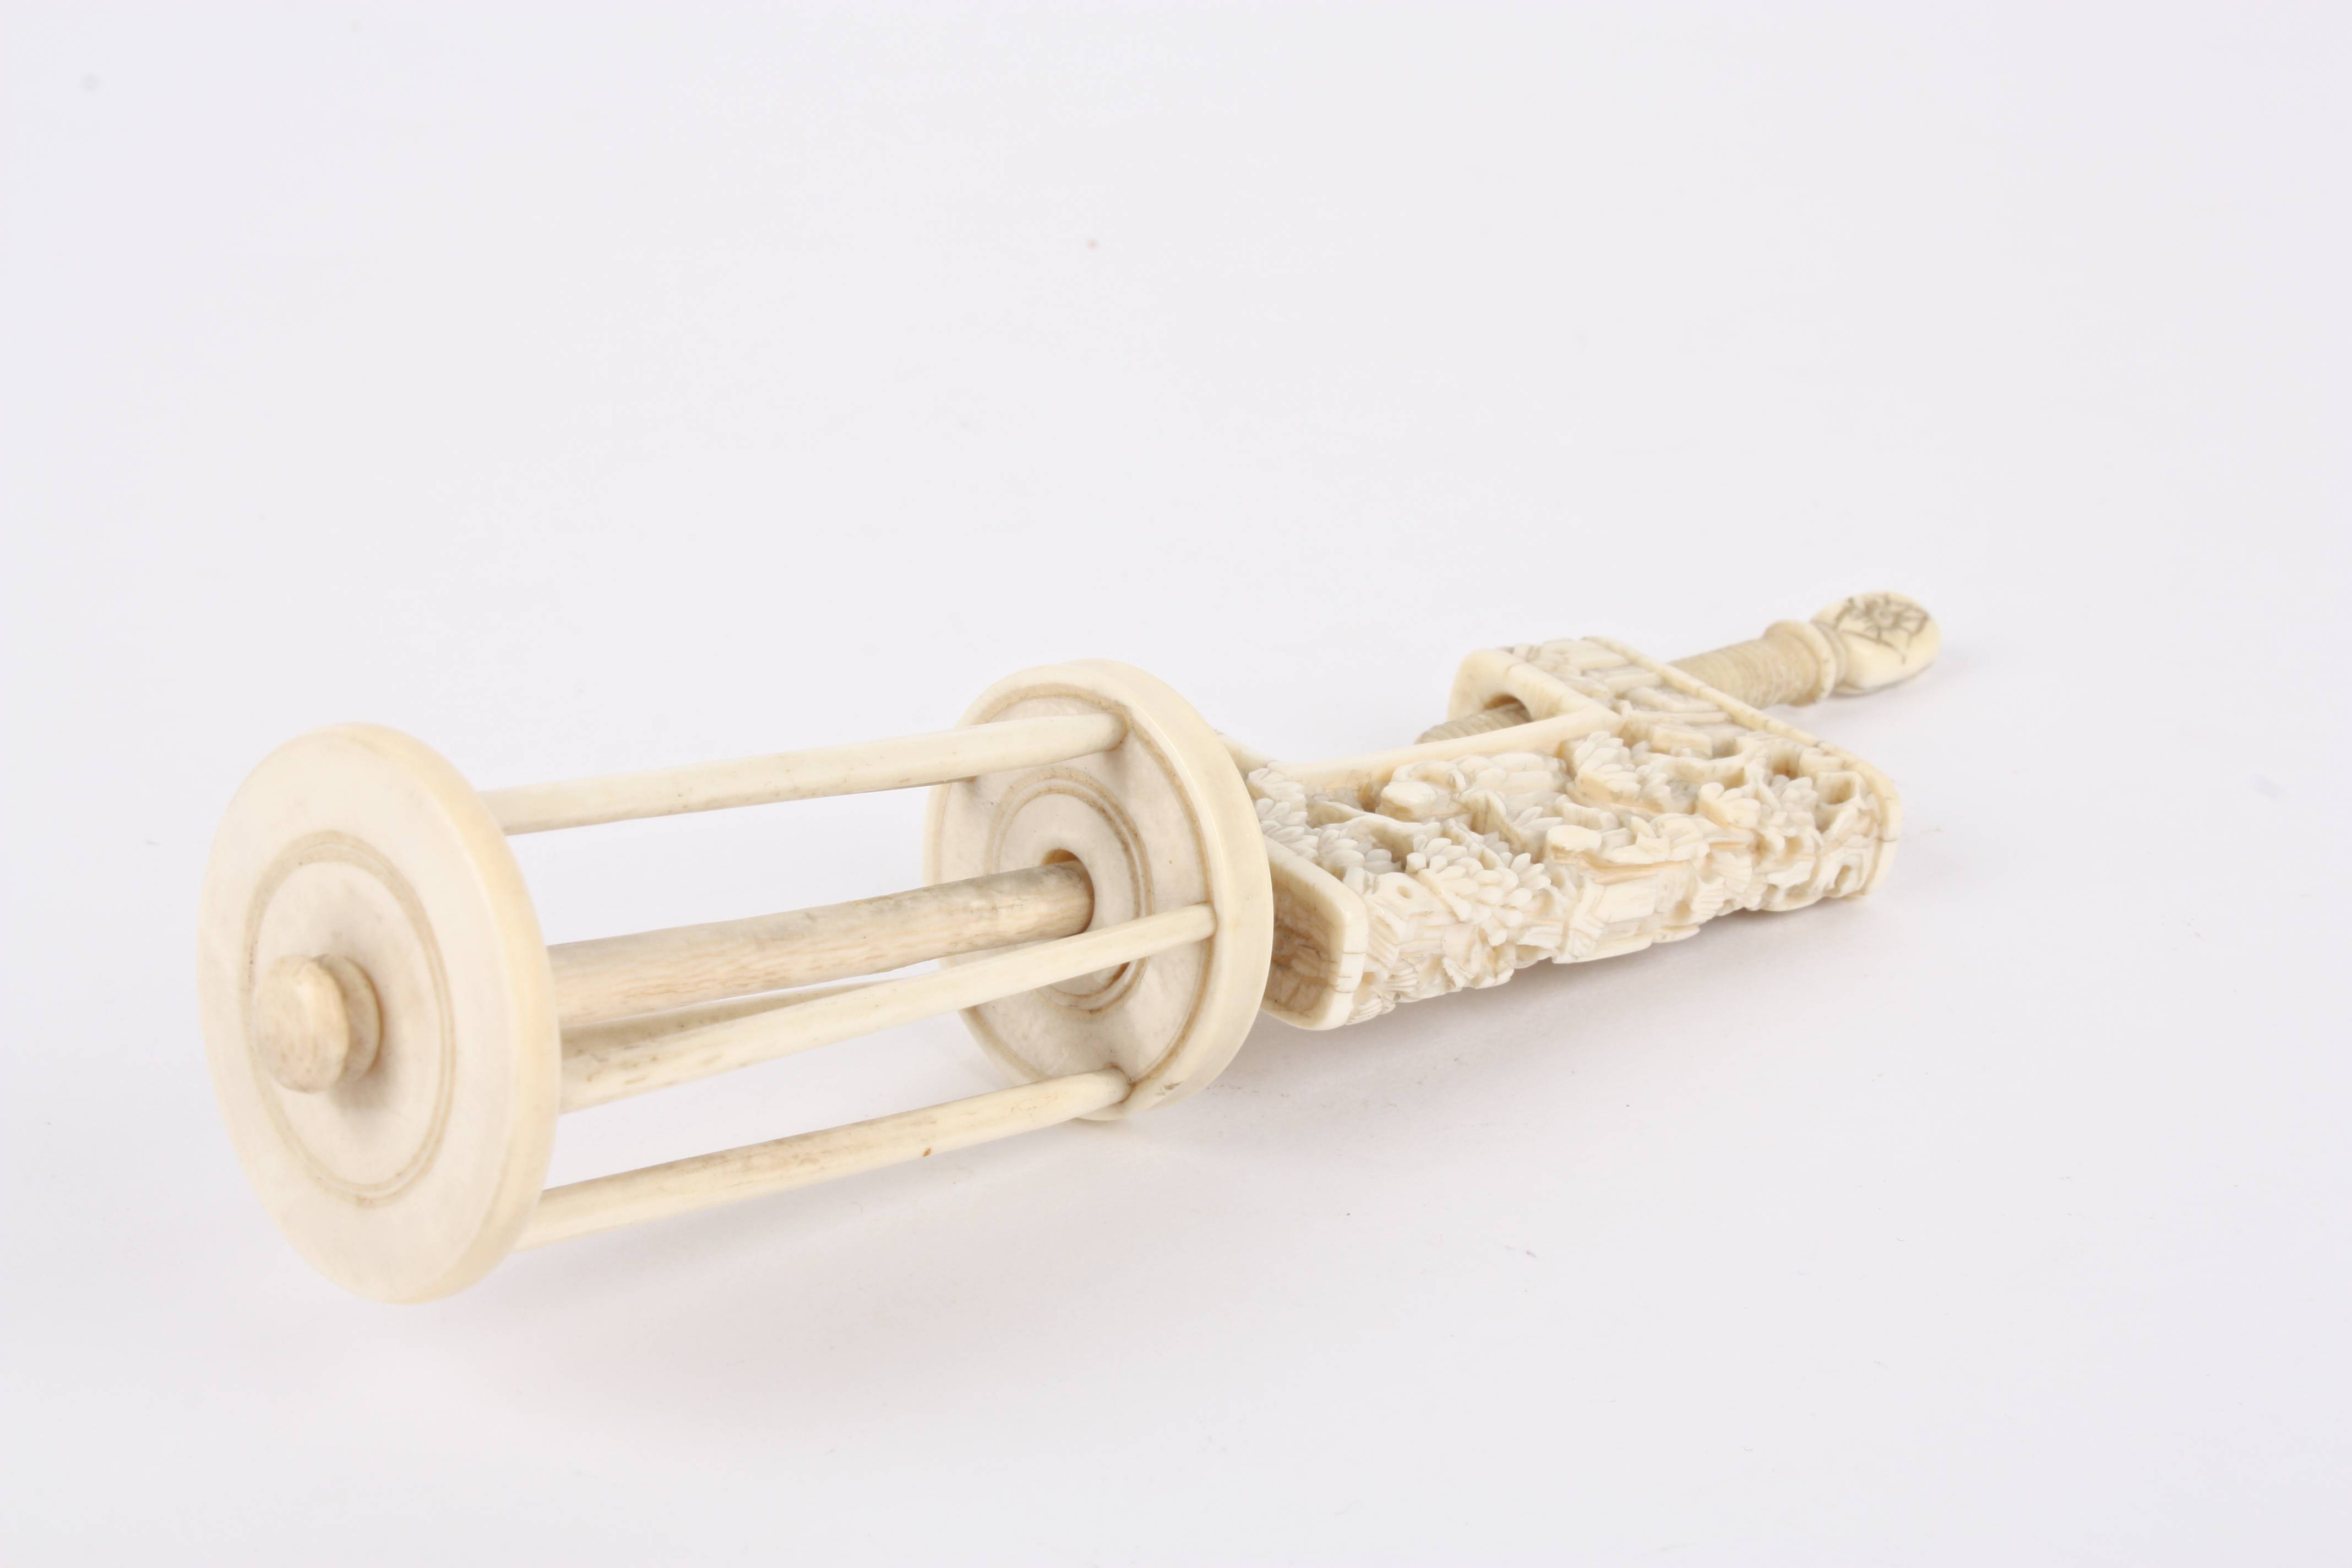 A late 19th century Chinese canton ivory bobbin clamp carved with figures, buildings and foliage. - Image 3 of 3